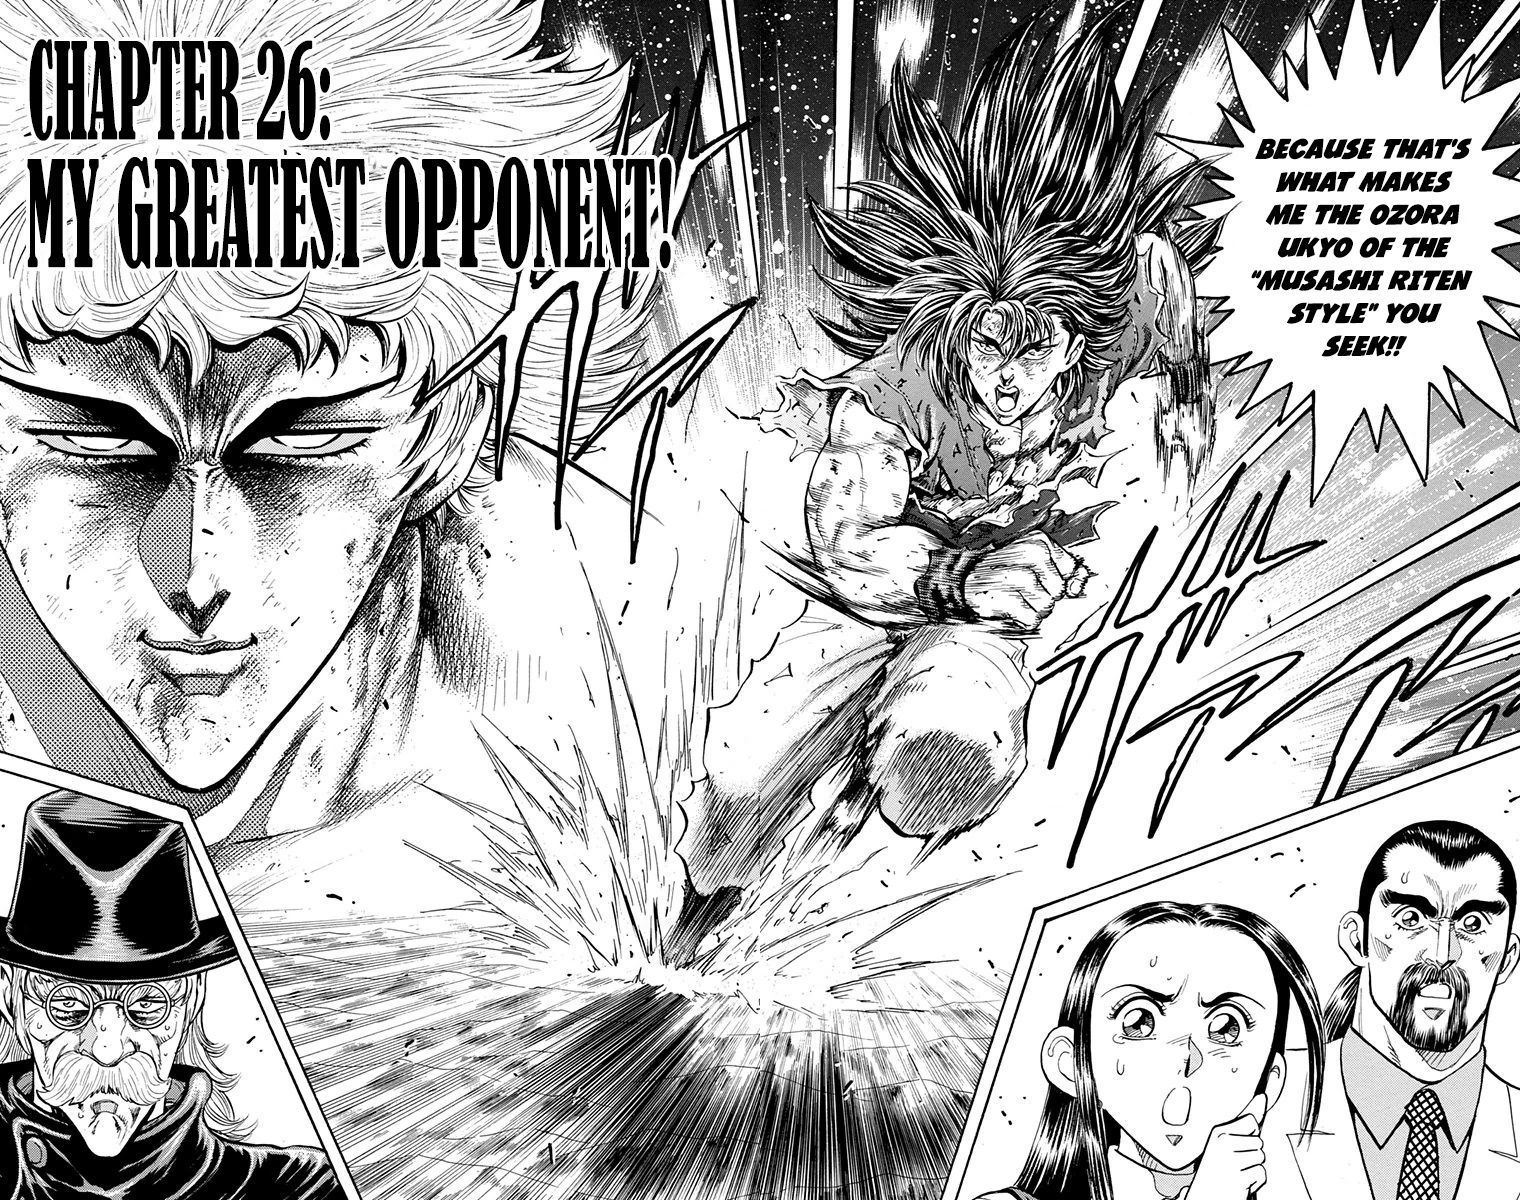 Ukyo No Ozora Vol.8 Chapter 26: My Greatest Opponent! - Picture 2